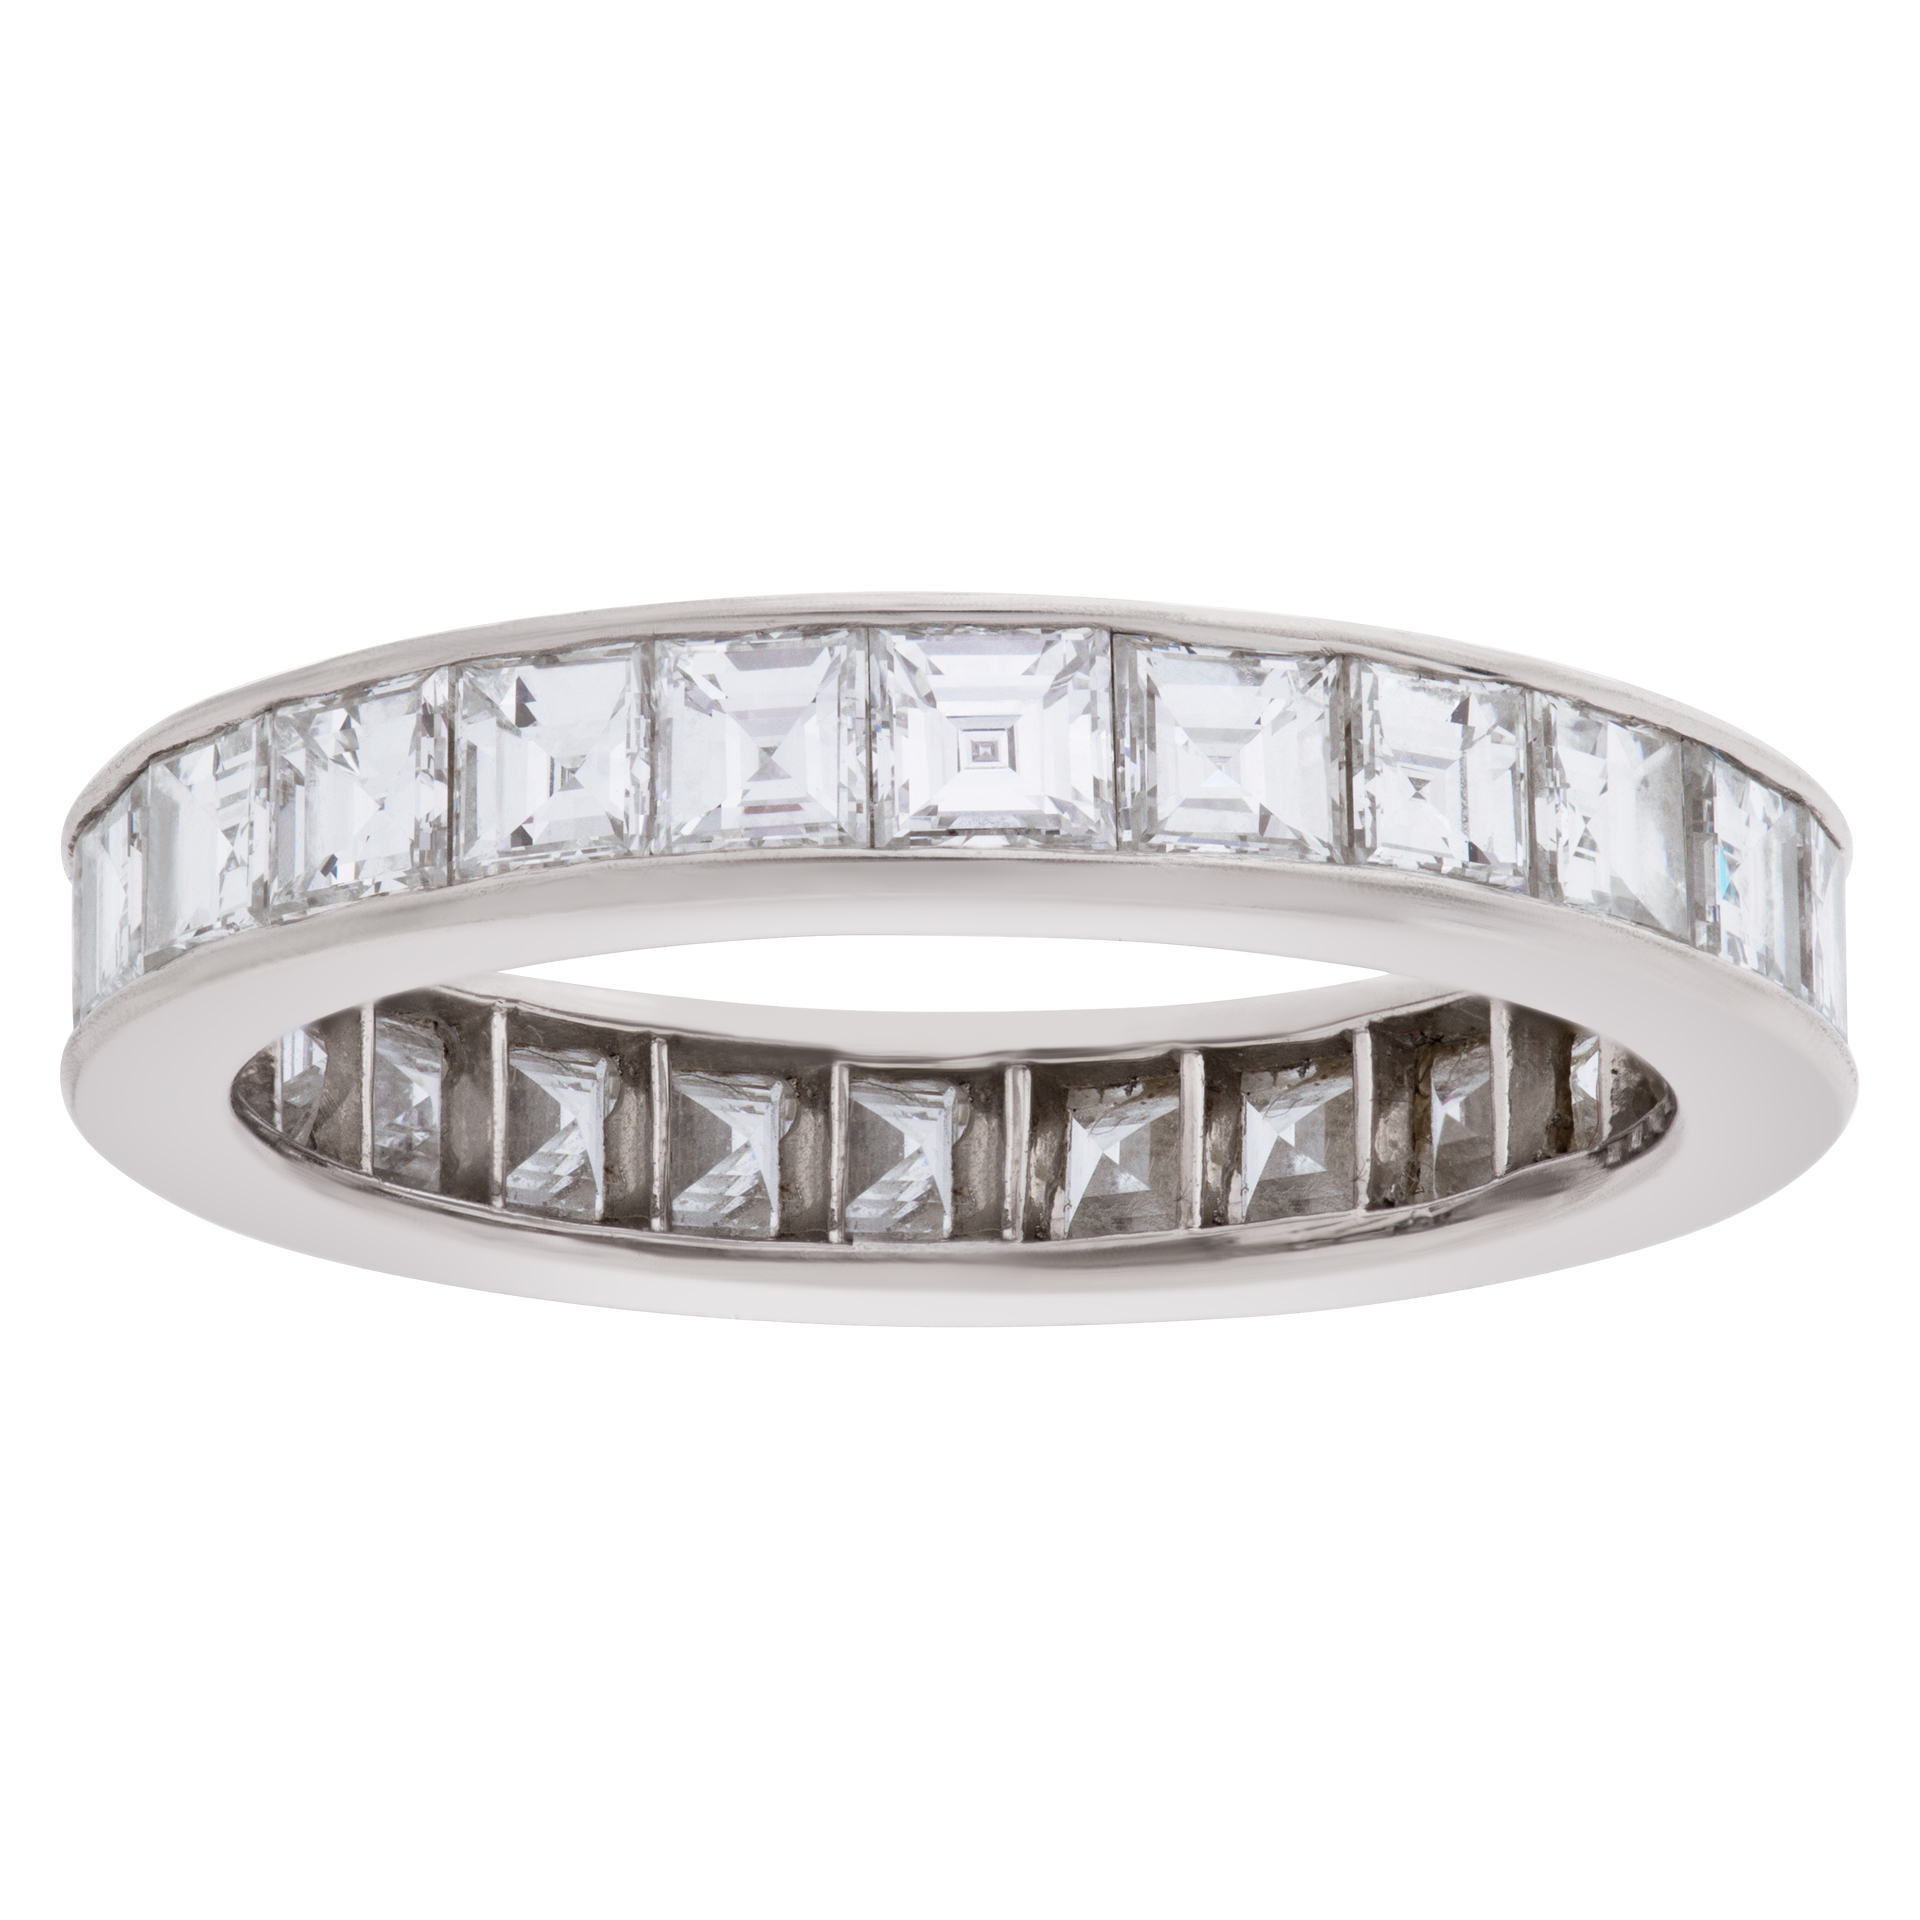 Platinum eternity band with approximately 3.12 carats in diamonds image 1